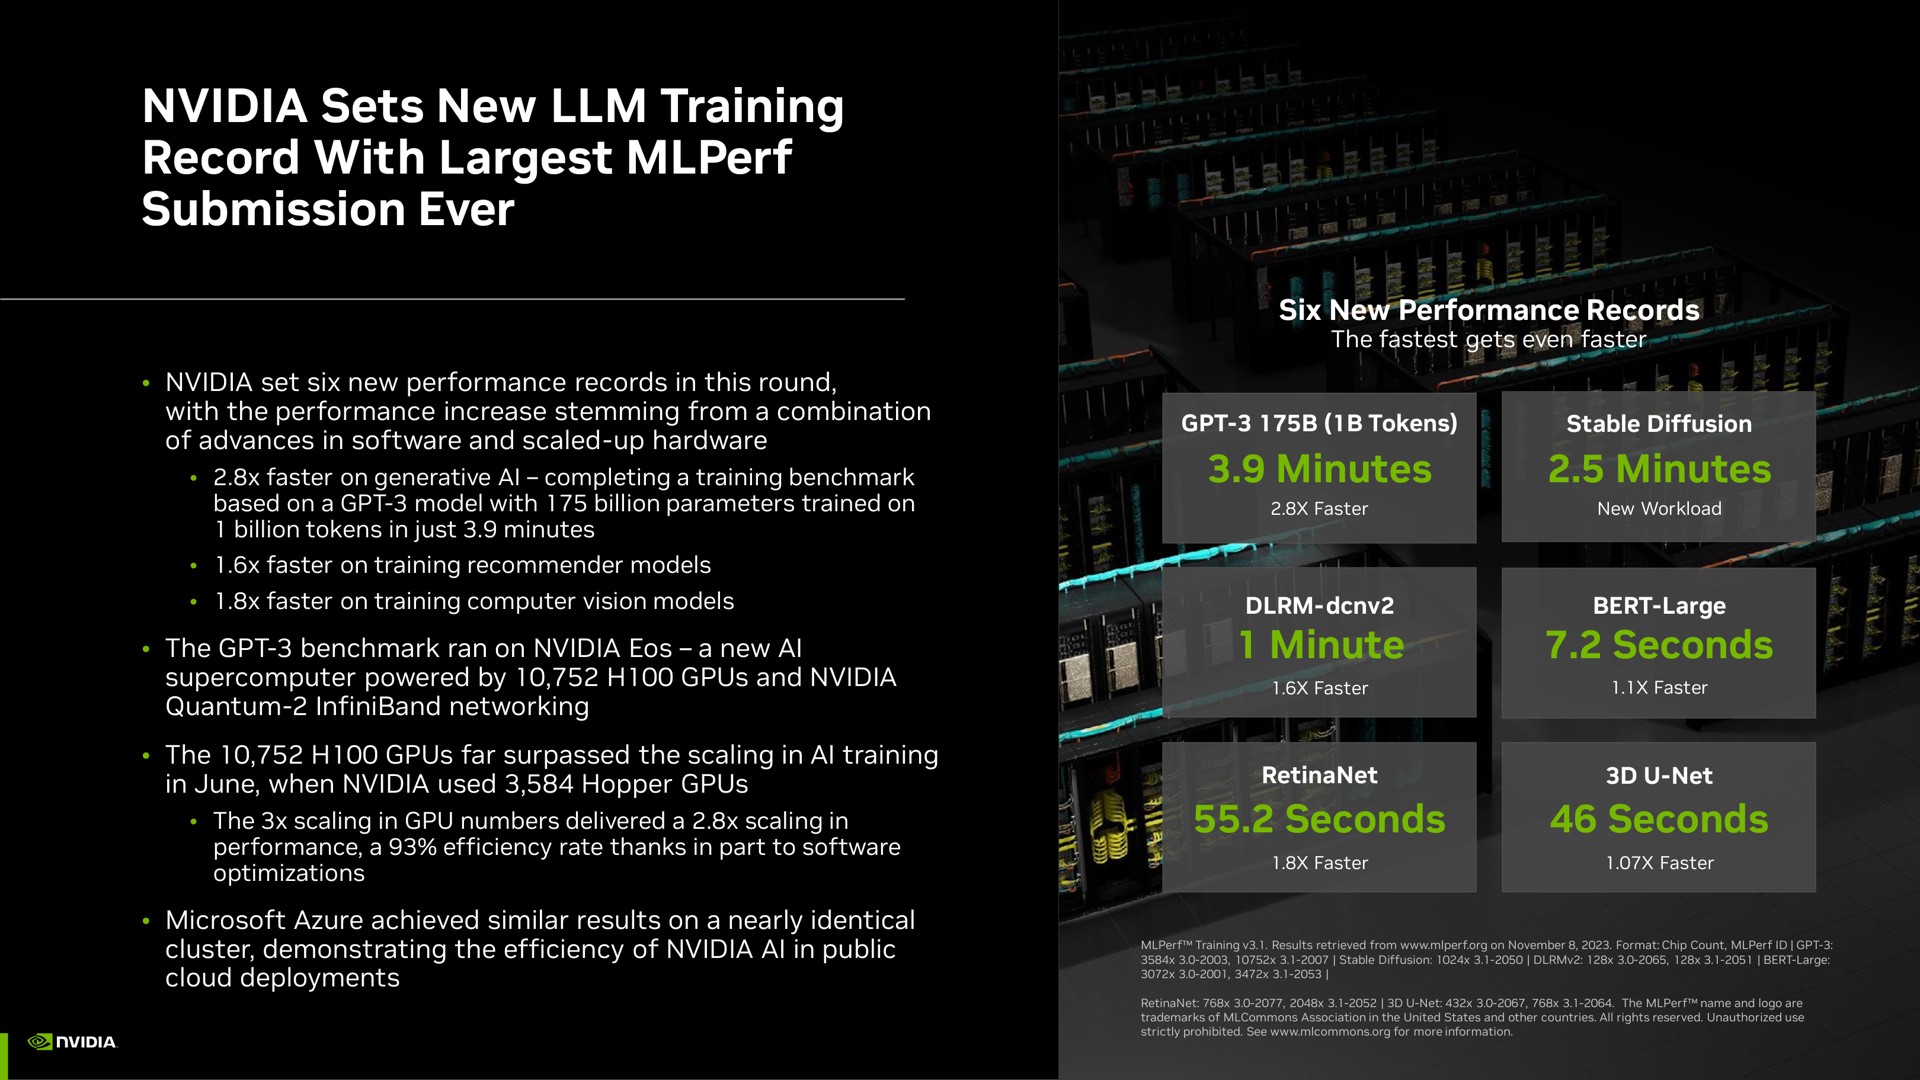 sets new training record with submission ever minutes minutes minute seconds seconds seconds i | NVIDIA